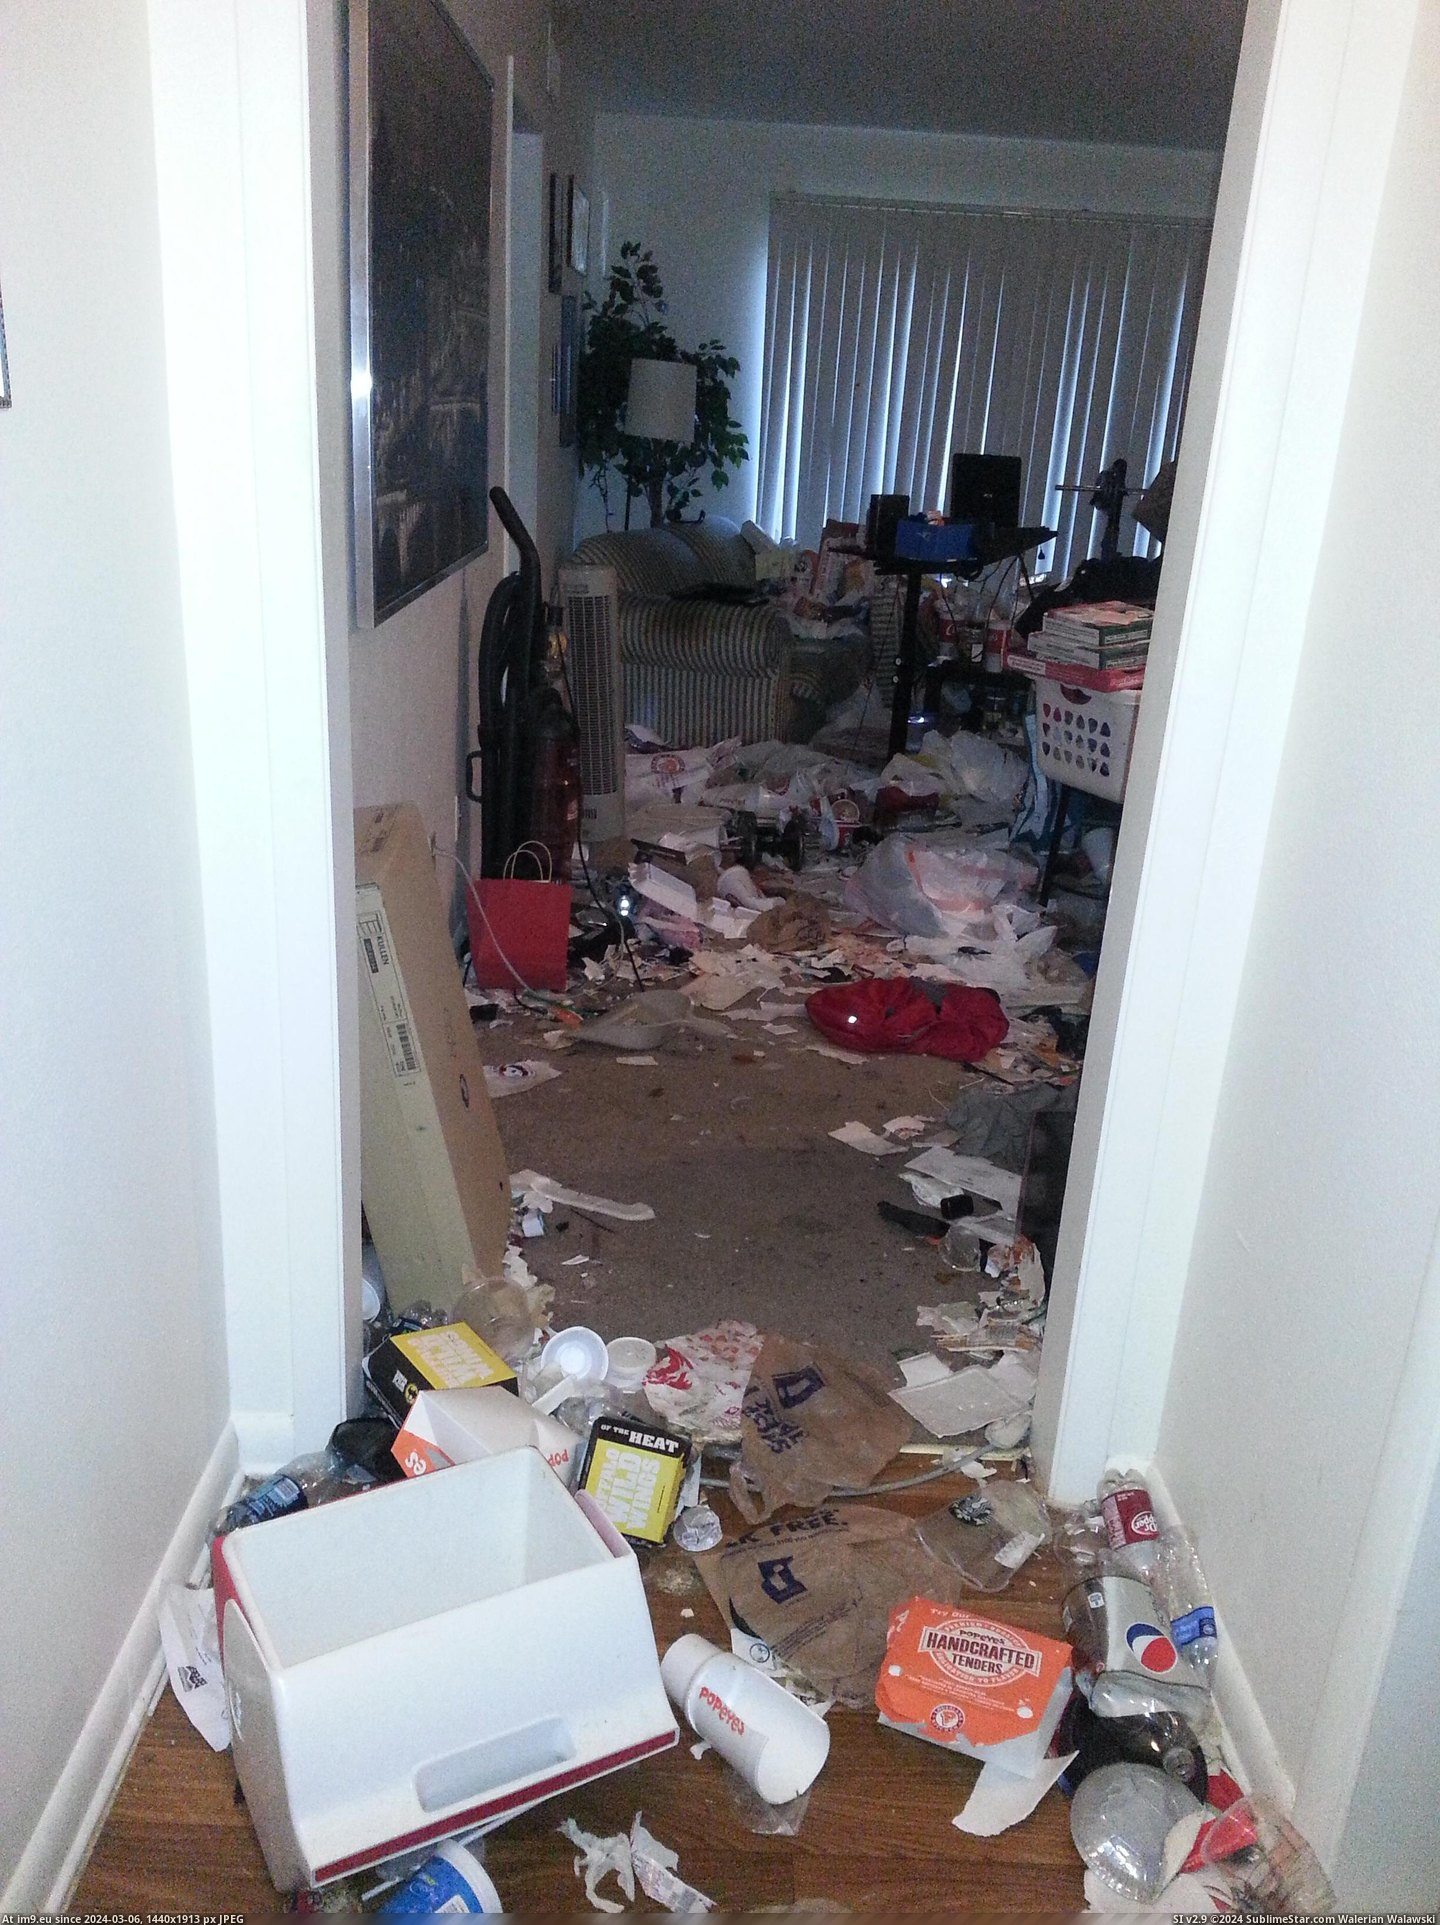 #For #Had #Bit #Brother #Apartment #Drove #Funk #Called #Hours #Walk #Clean [Pics] My brother had been in a bit of a funk. He called me for help to clean his apartment. I drove 4 hours to walk into this.  Pic. (Obraz z album My r/PICS favs))